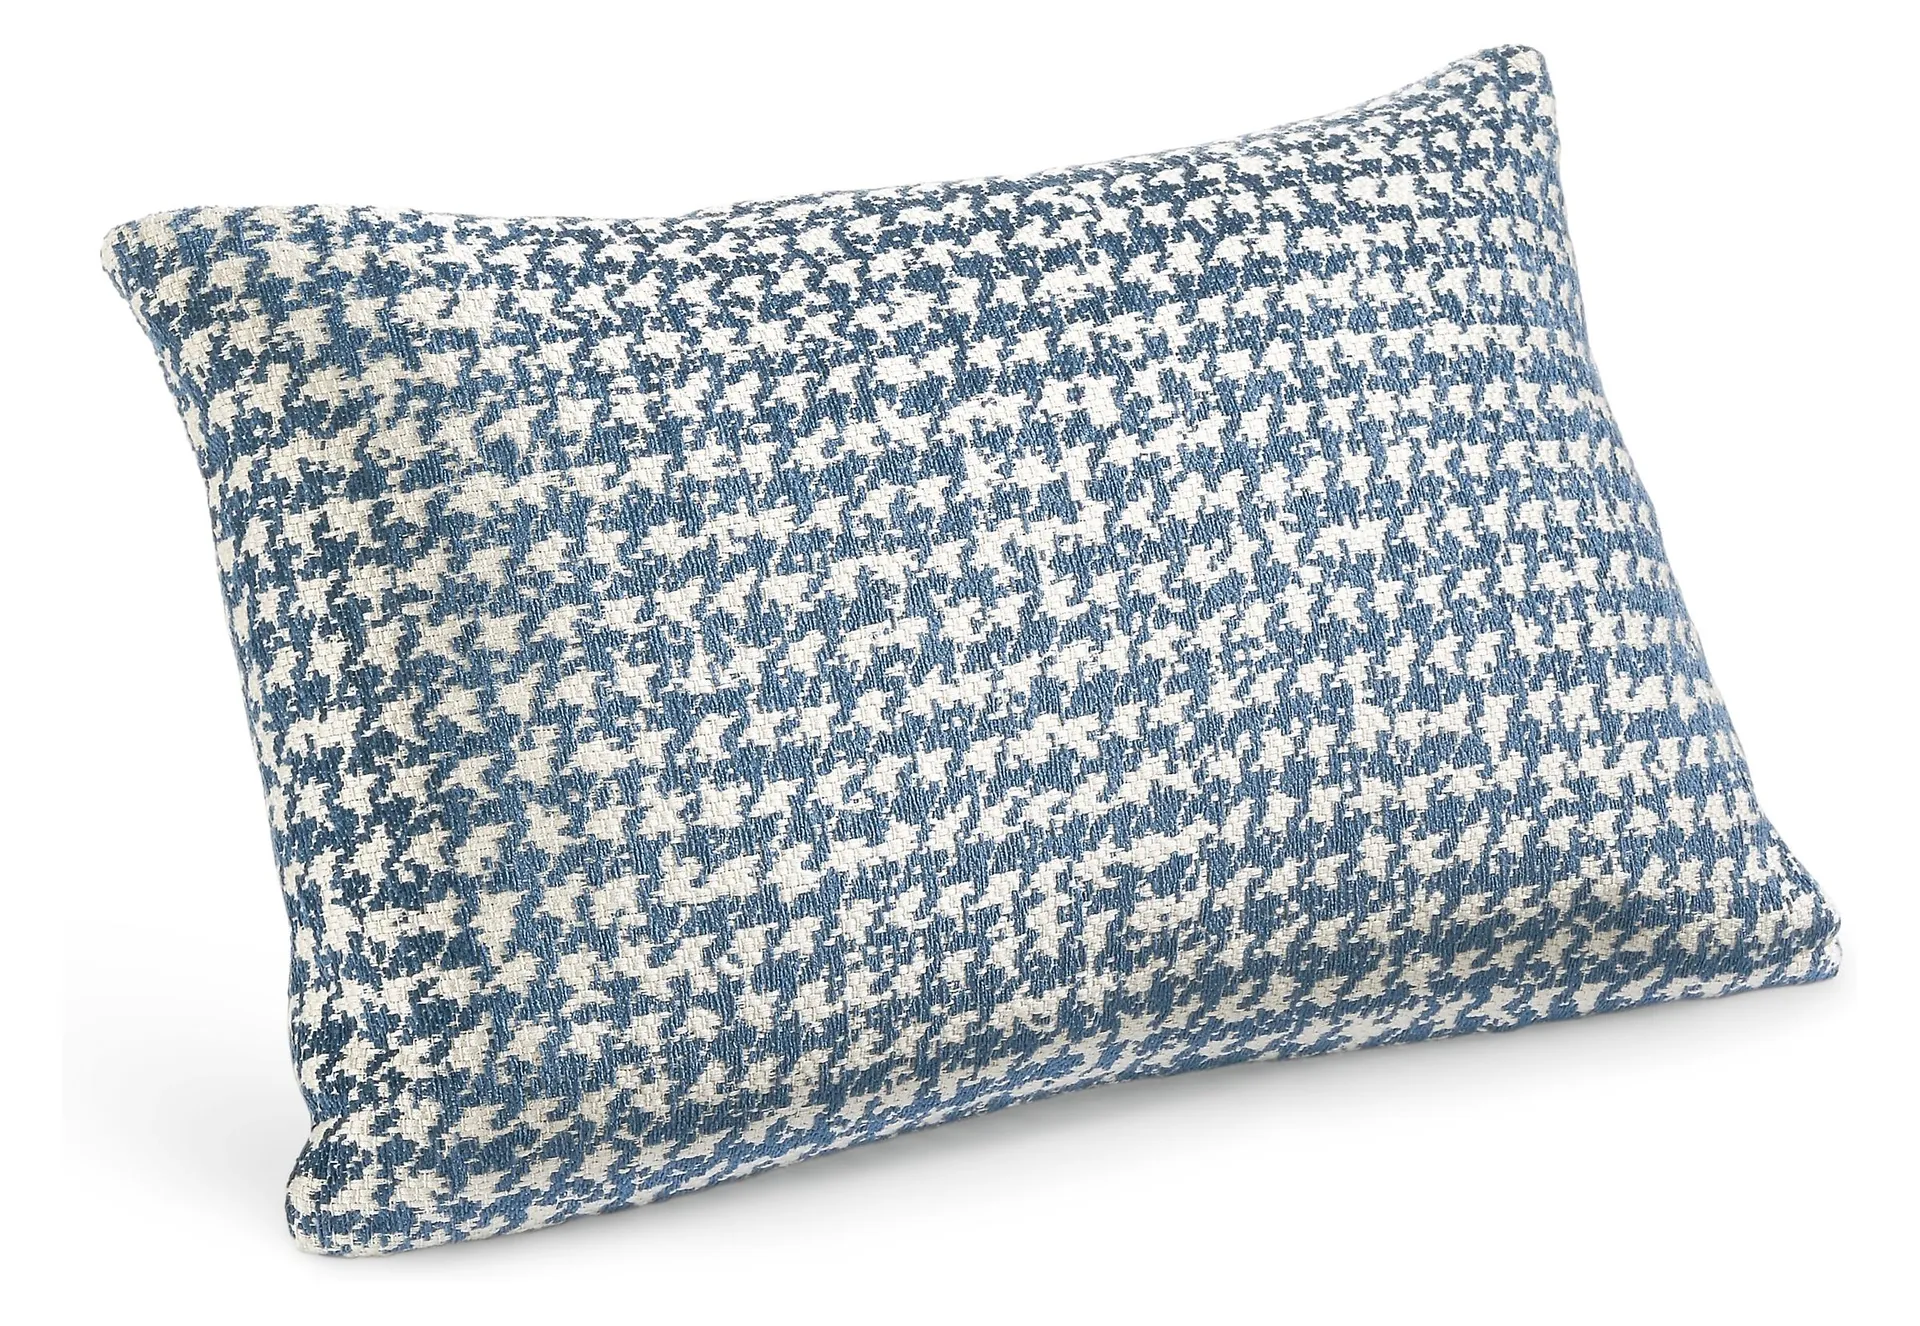 Barnes 20w 13h Throw Pillow in Blue/White with Down Insert